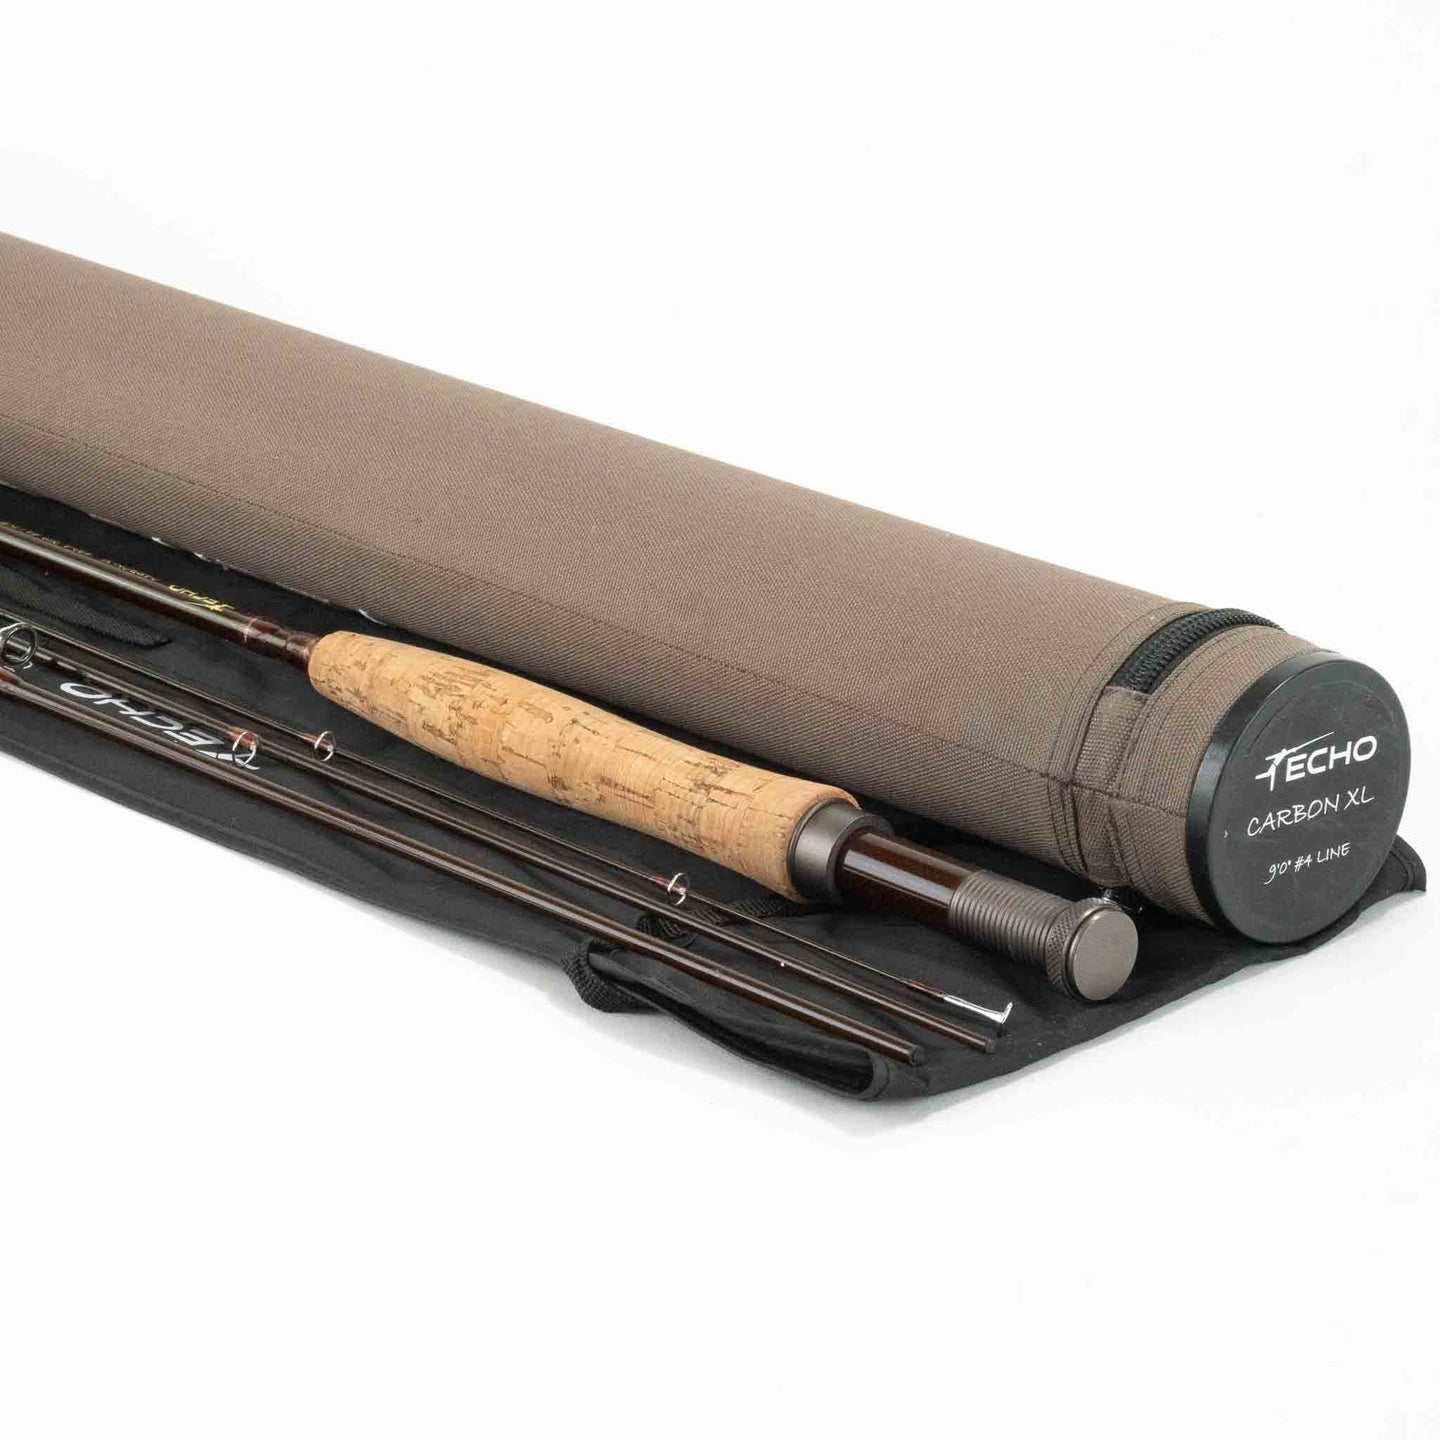 Echo Carbon XL 490-4 Fly Rod - 4wt 9ft 0in 4pc